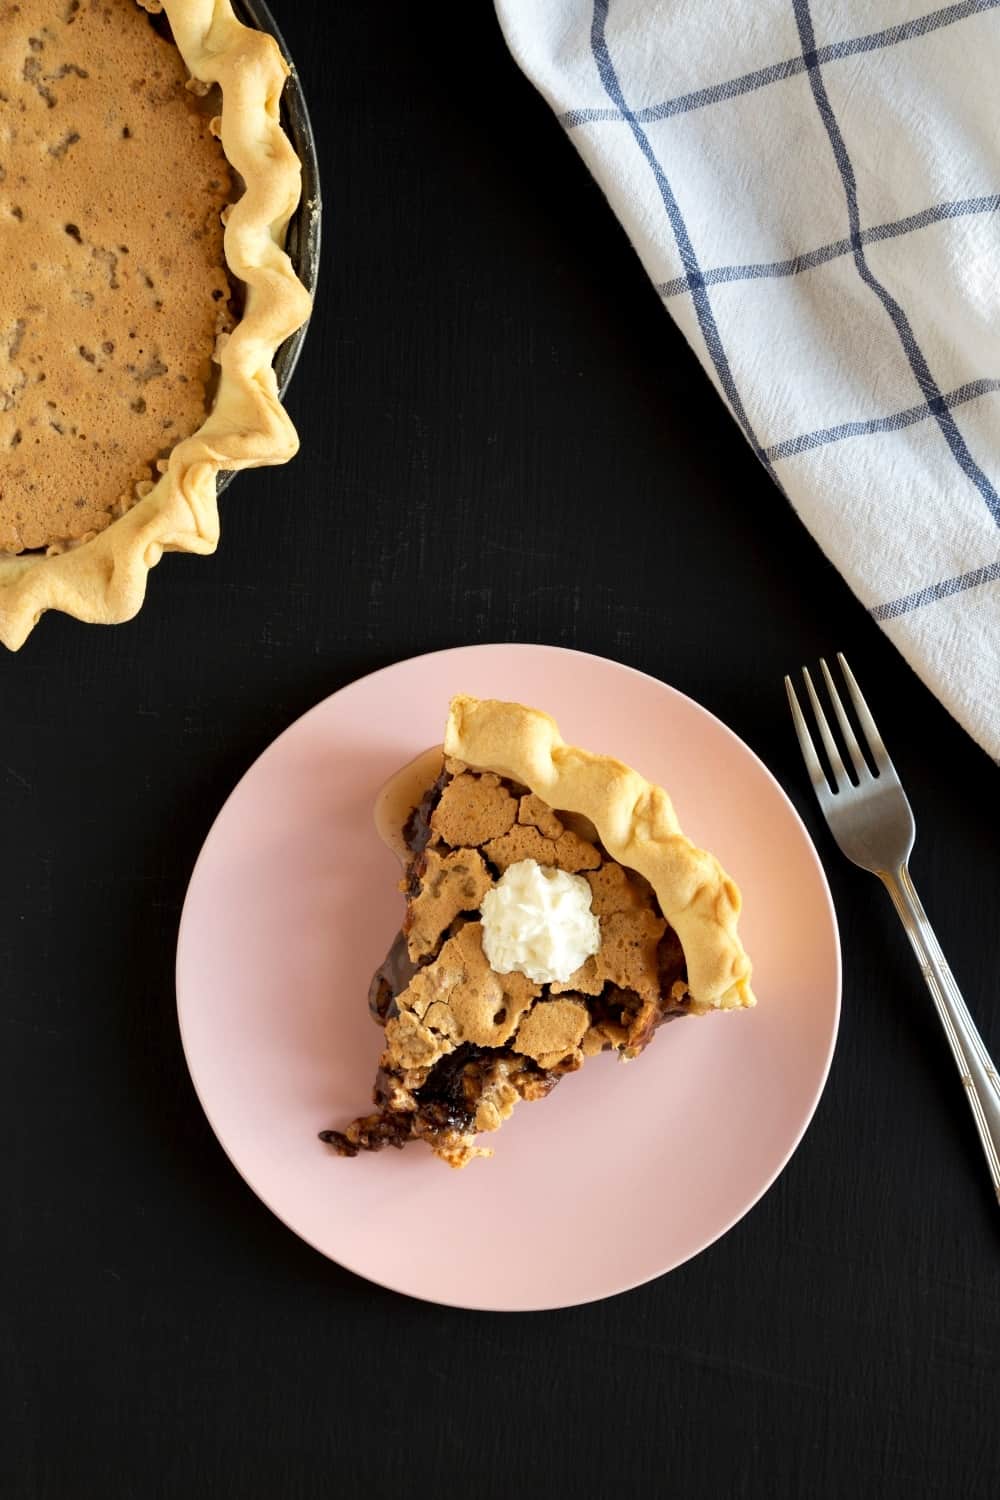 A piece of homemade Chocolate Walnut Derby Pie on a pink plate